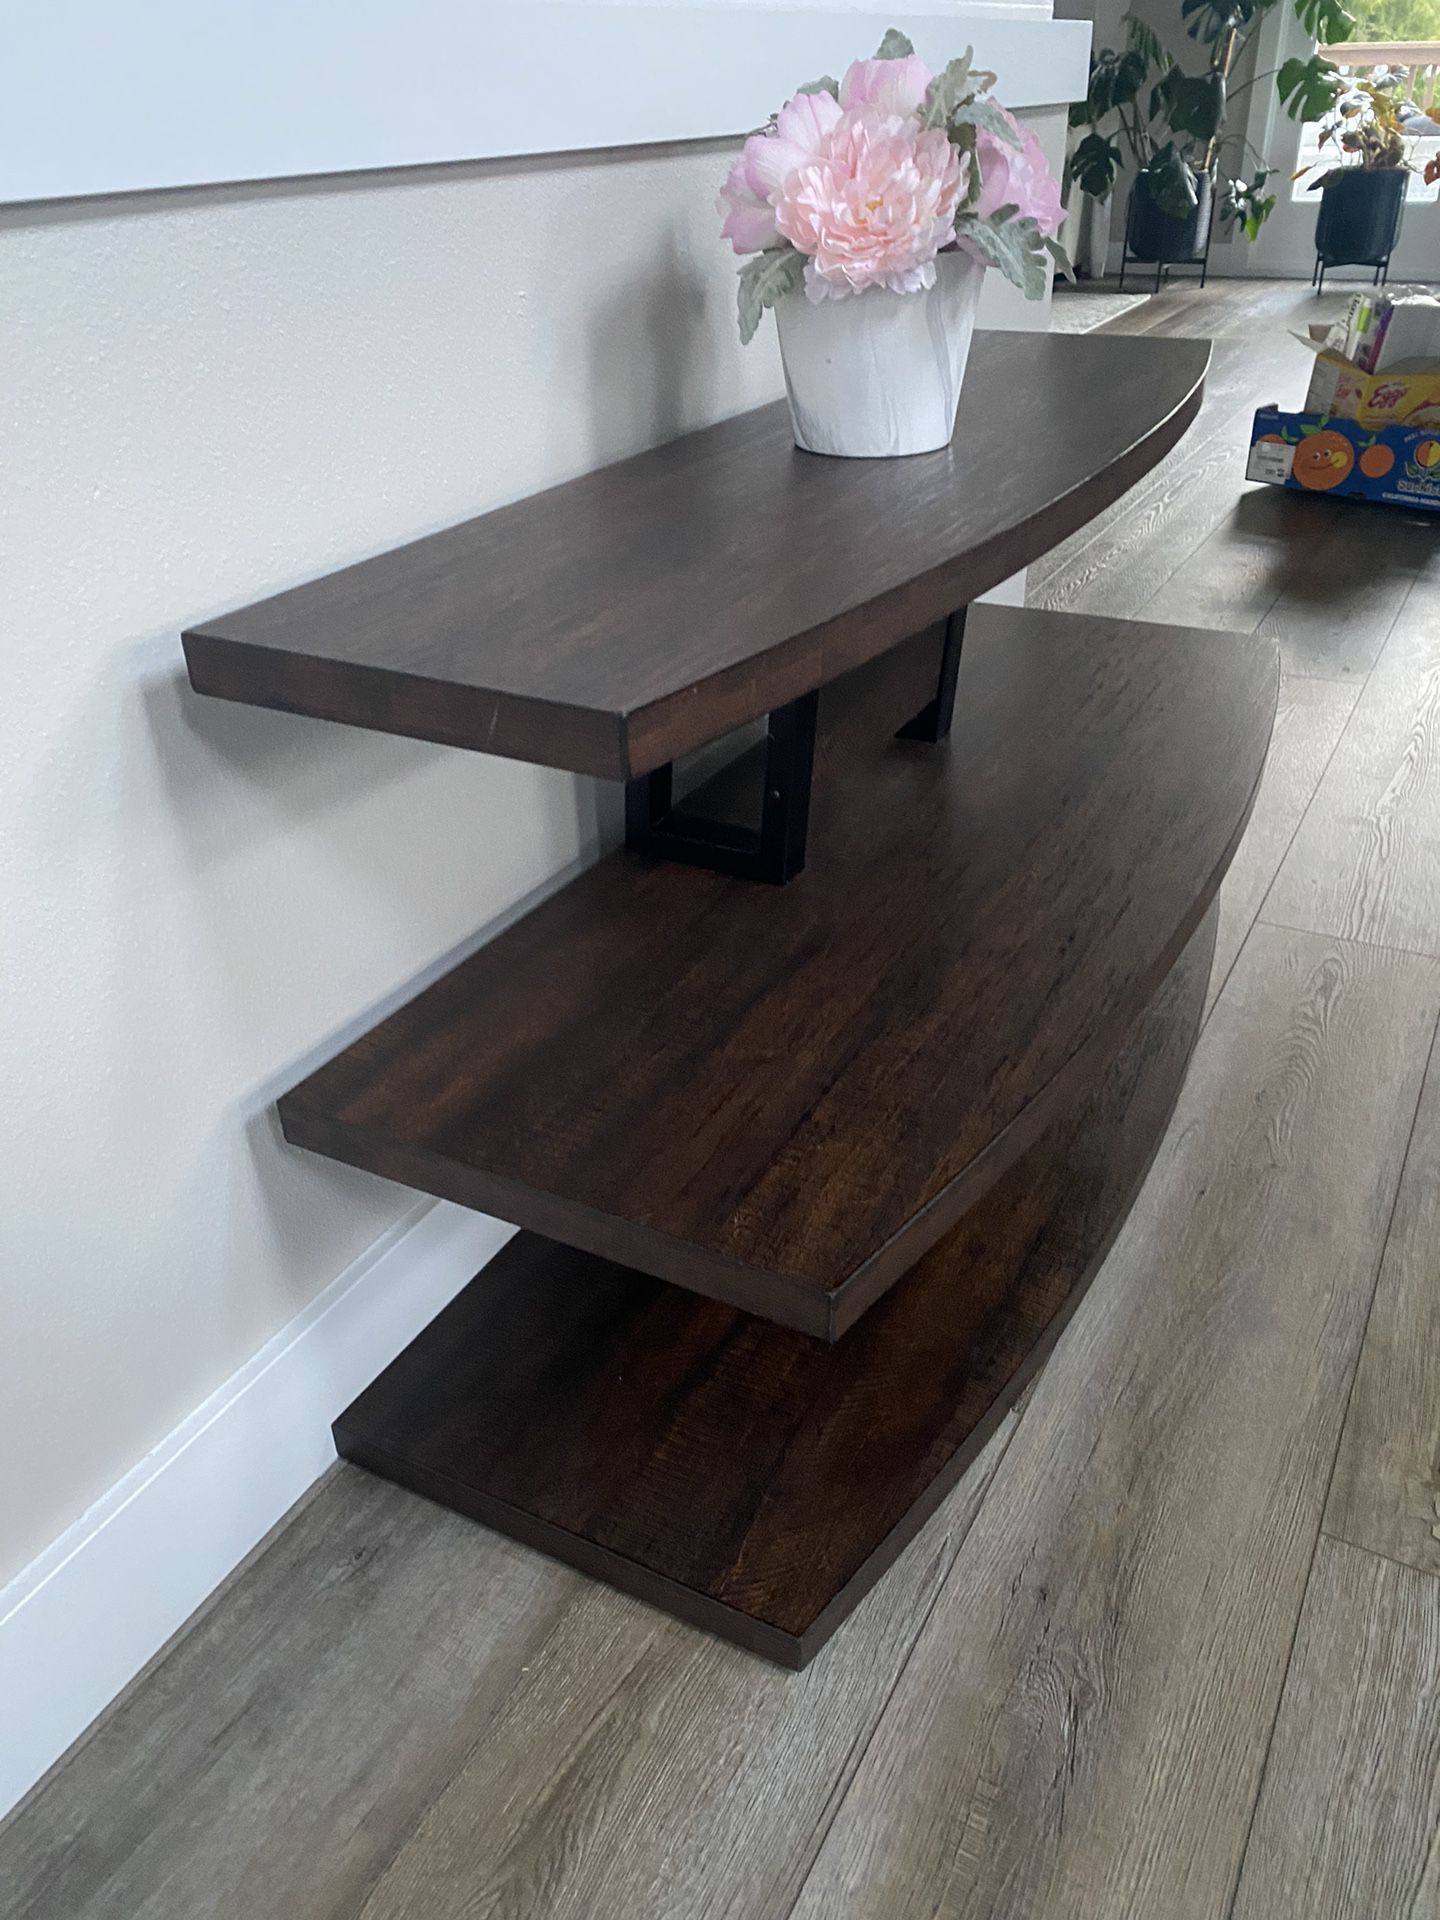 TV stand 48“ x 19“ x 27“H